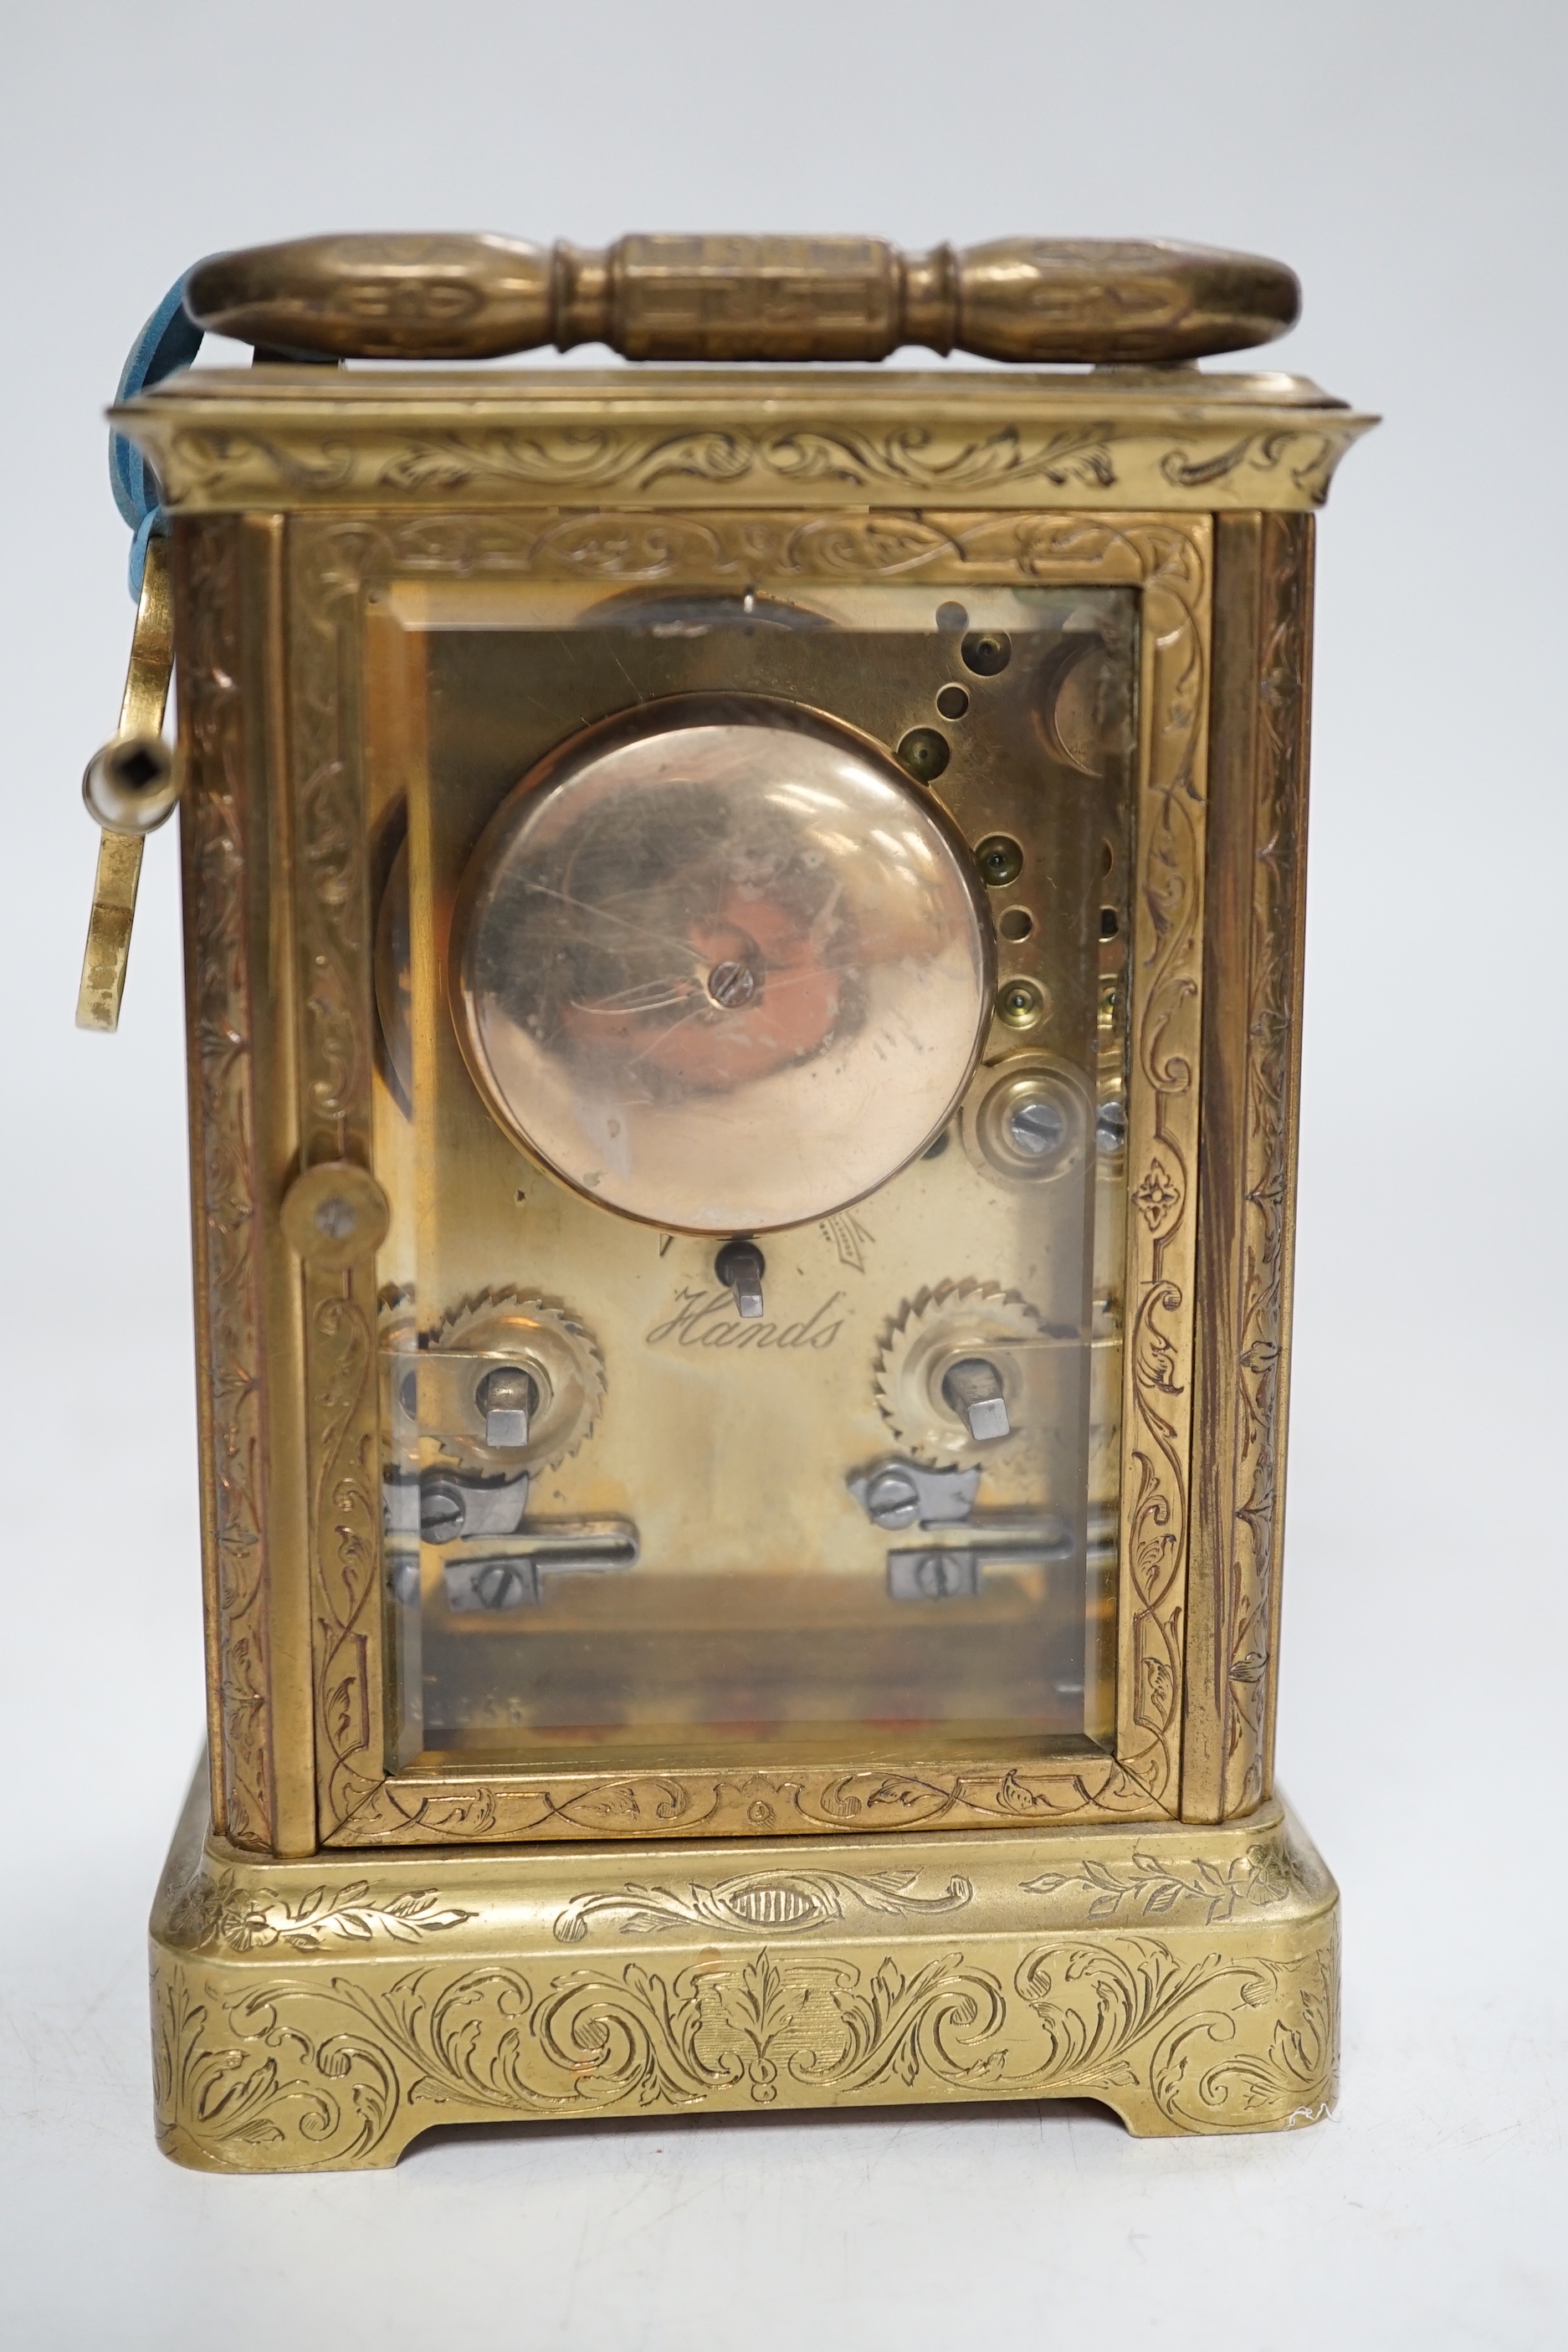 A late 19th century brass carriage clock, 12cm high